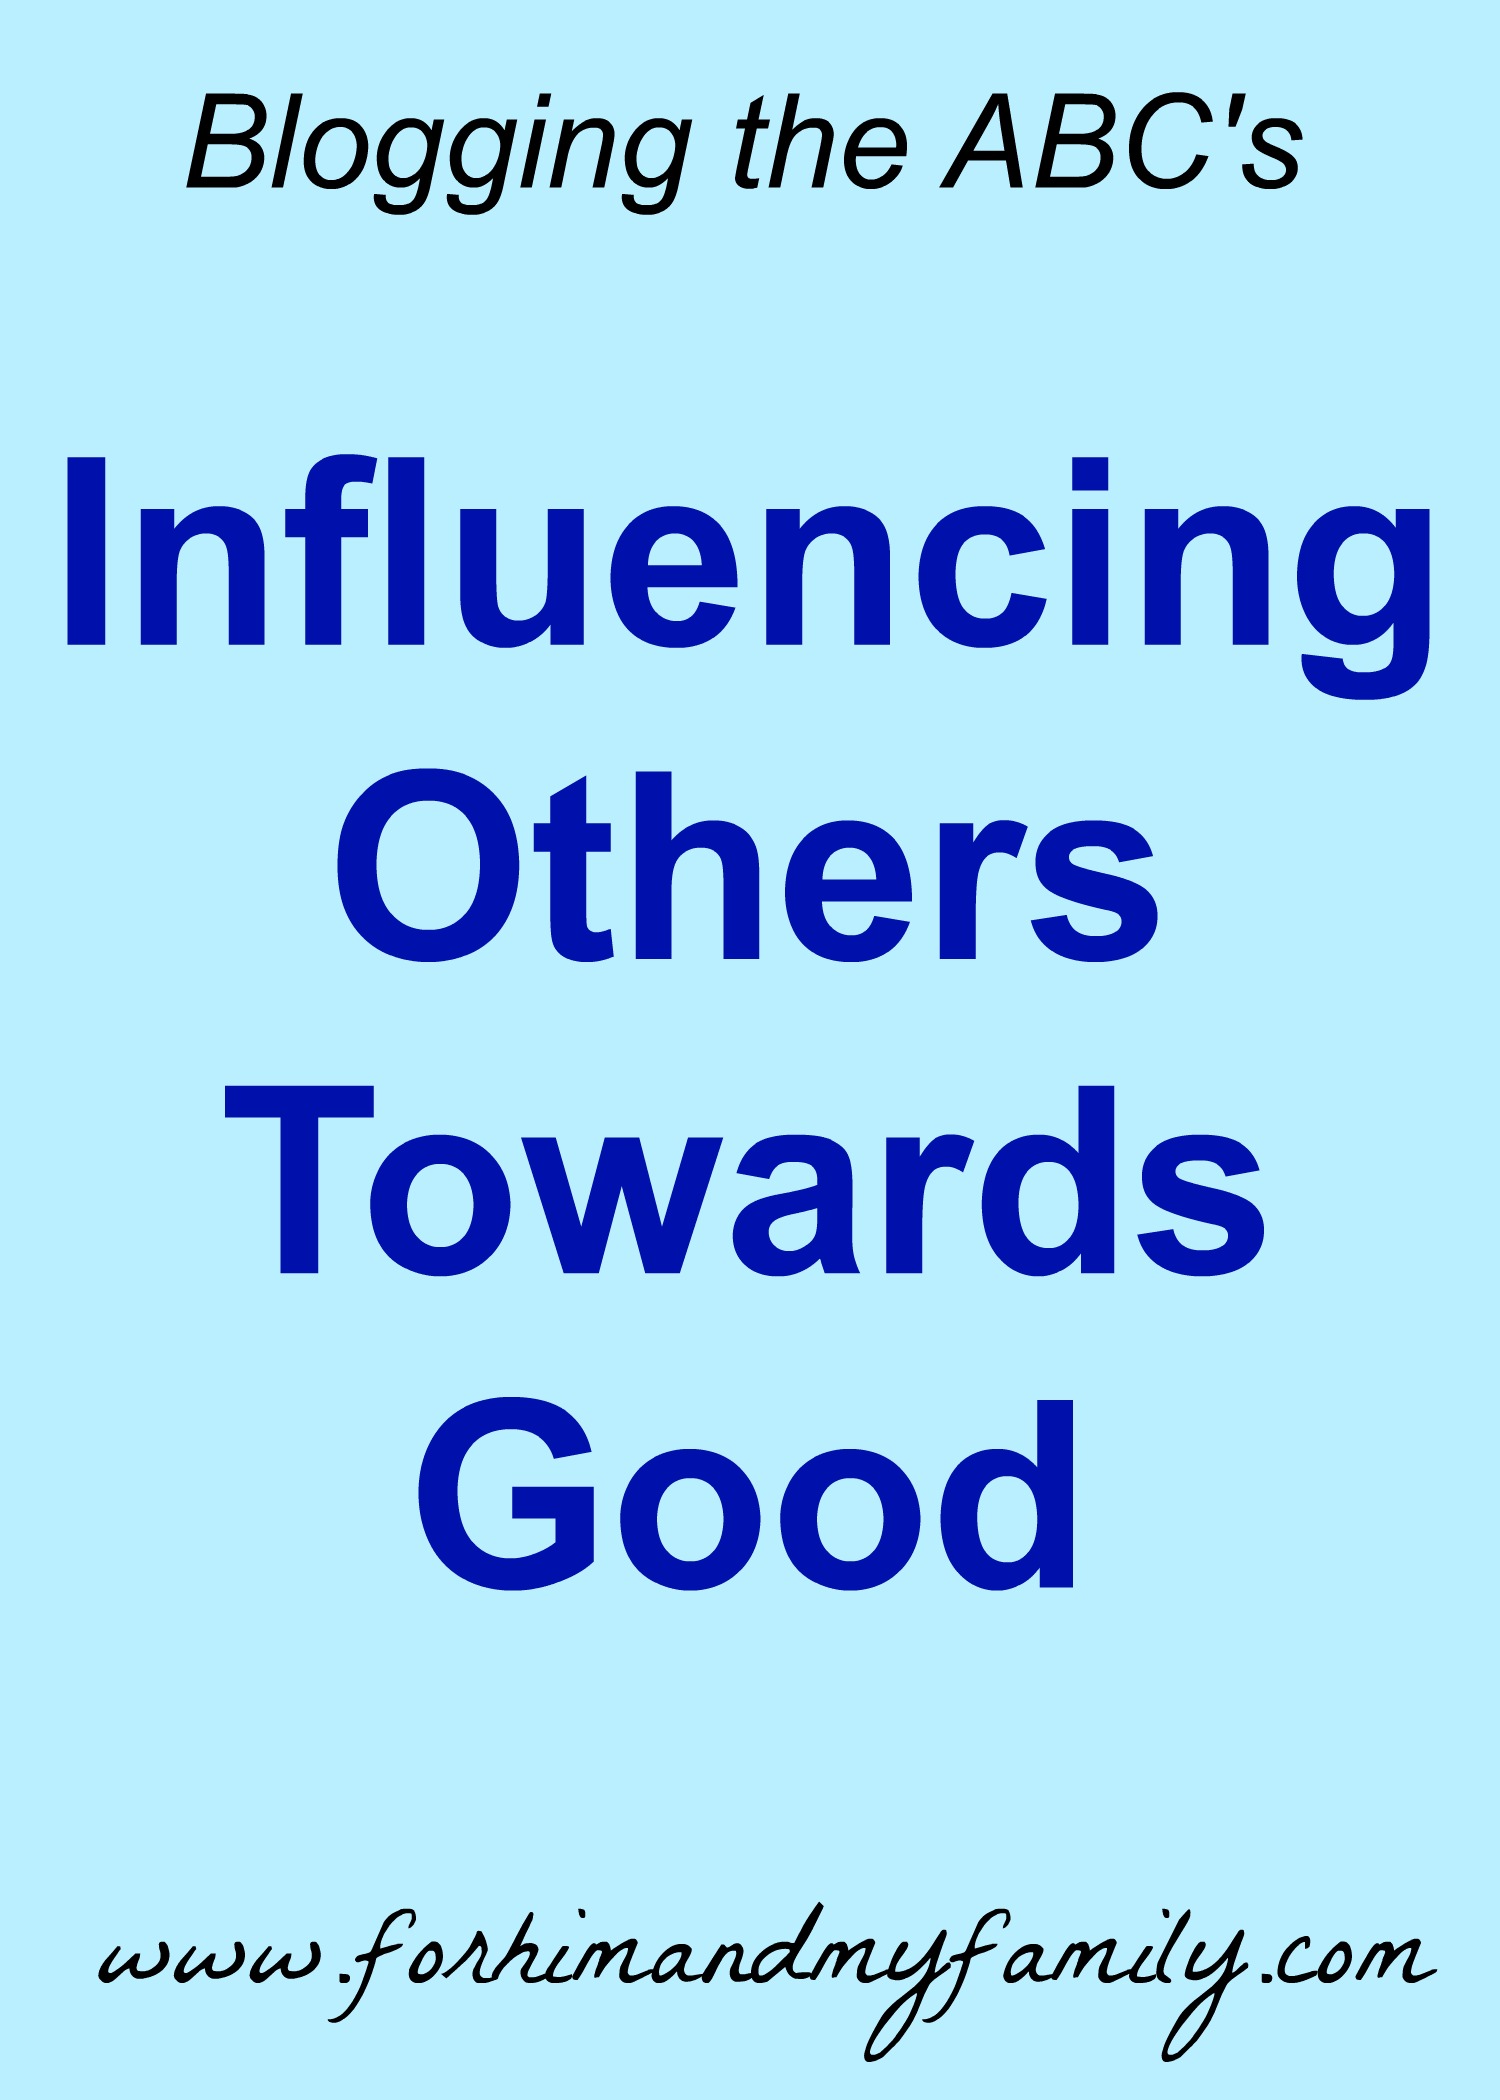 Influencing Others Towards Good {Blogging the ABC's Letter I}